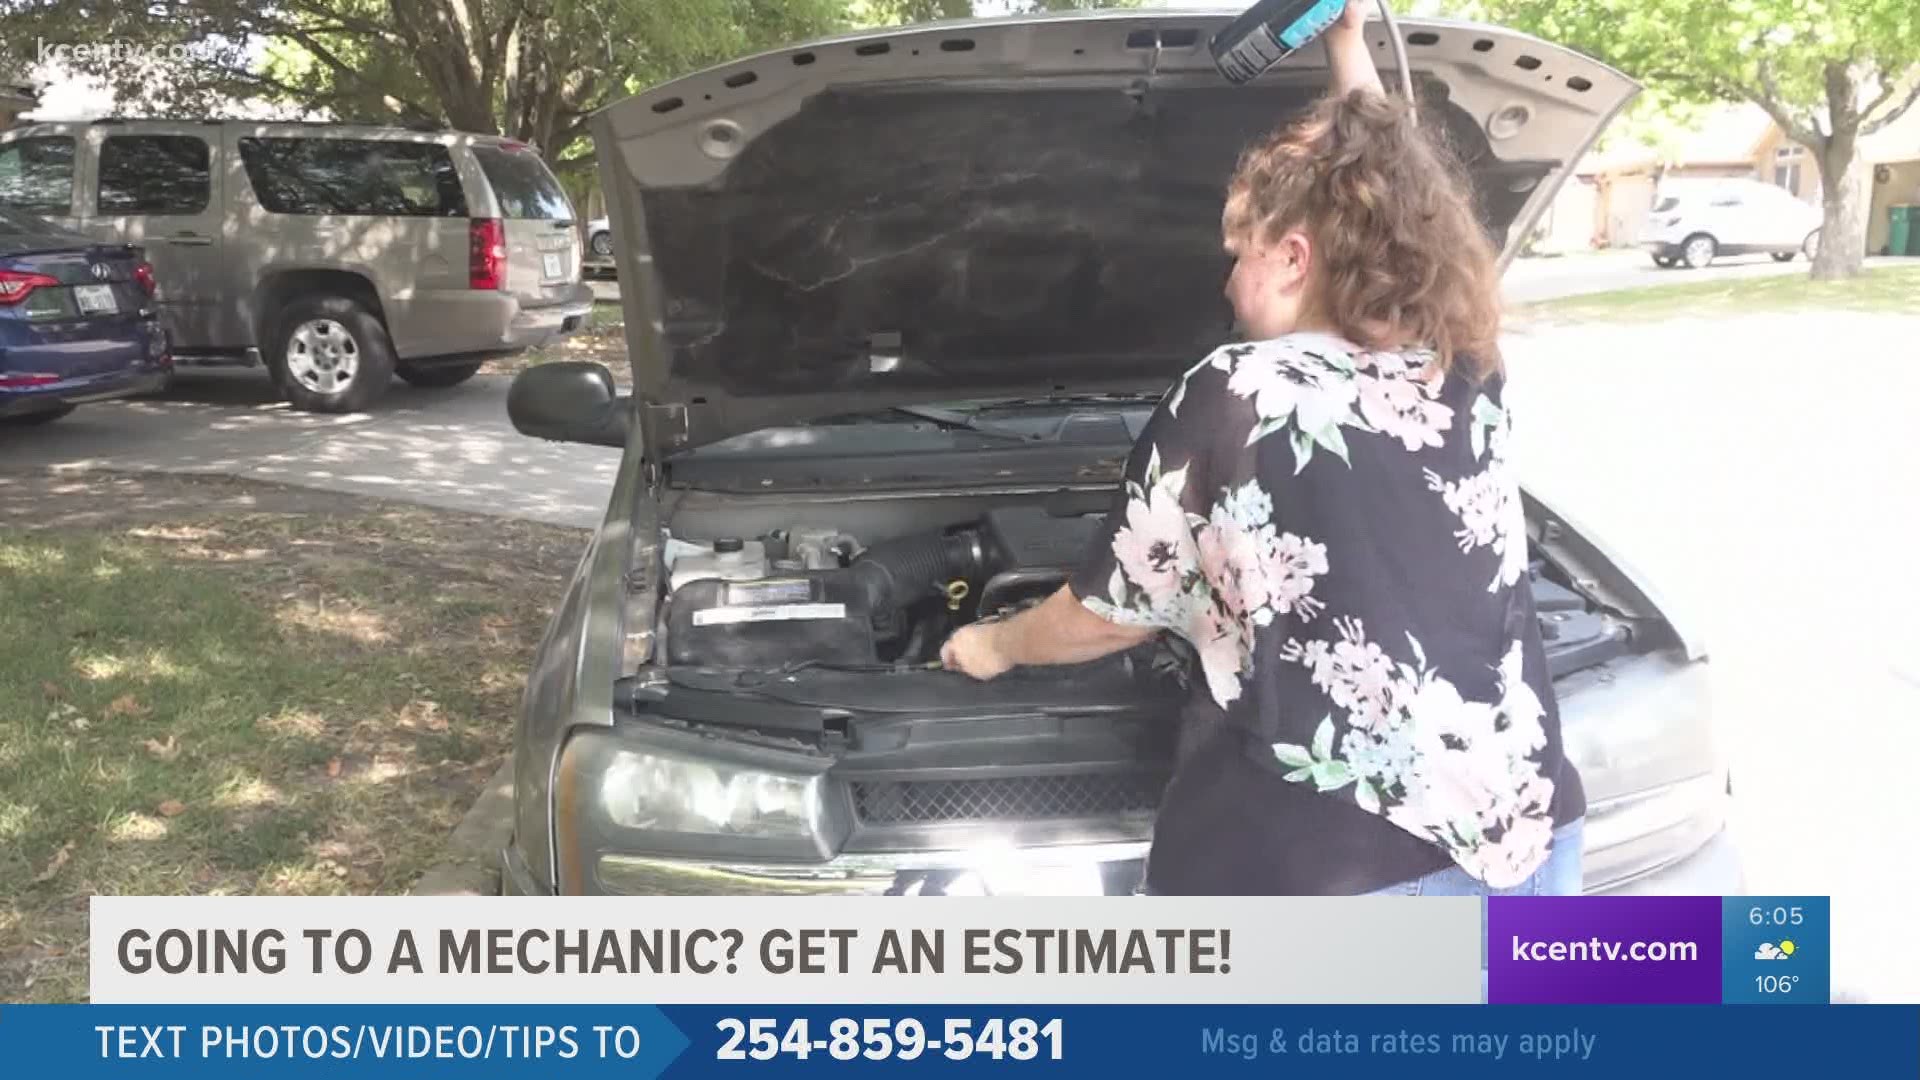 6 News Reporter Andrew Moore explains how you can avoid a mechanic starting repairs you didn't explicitly ask for.